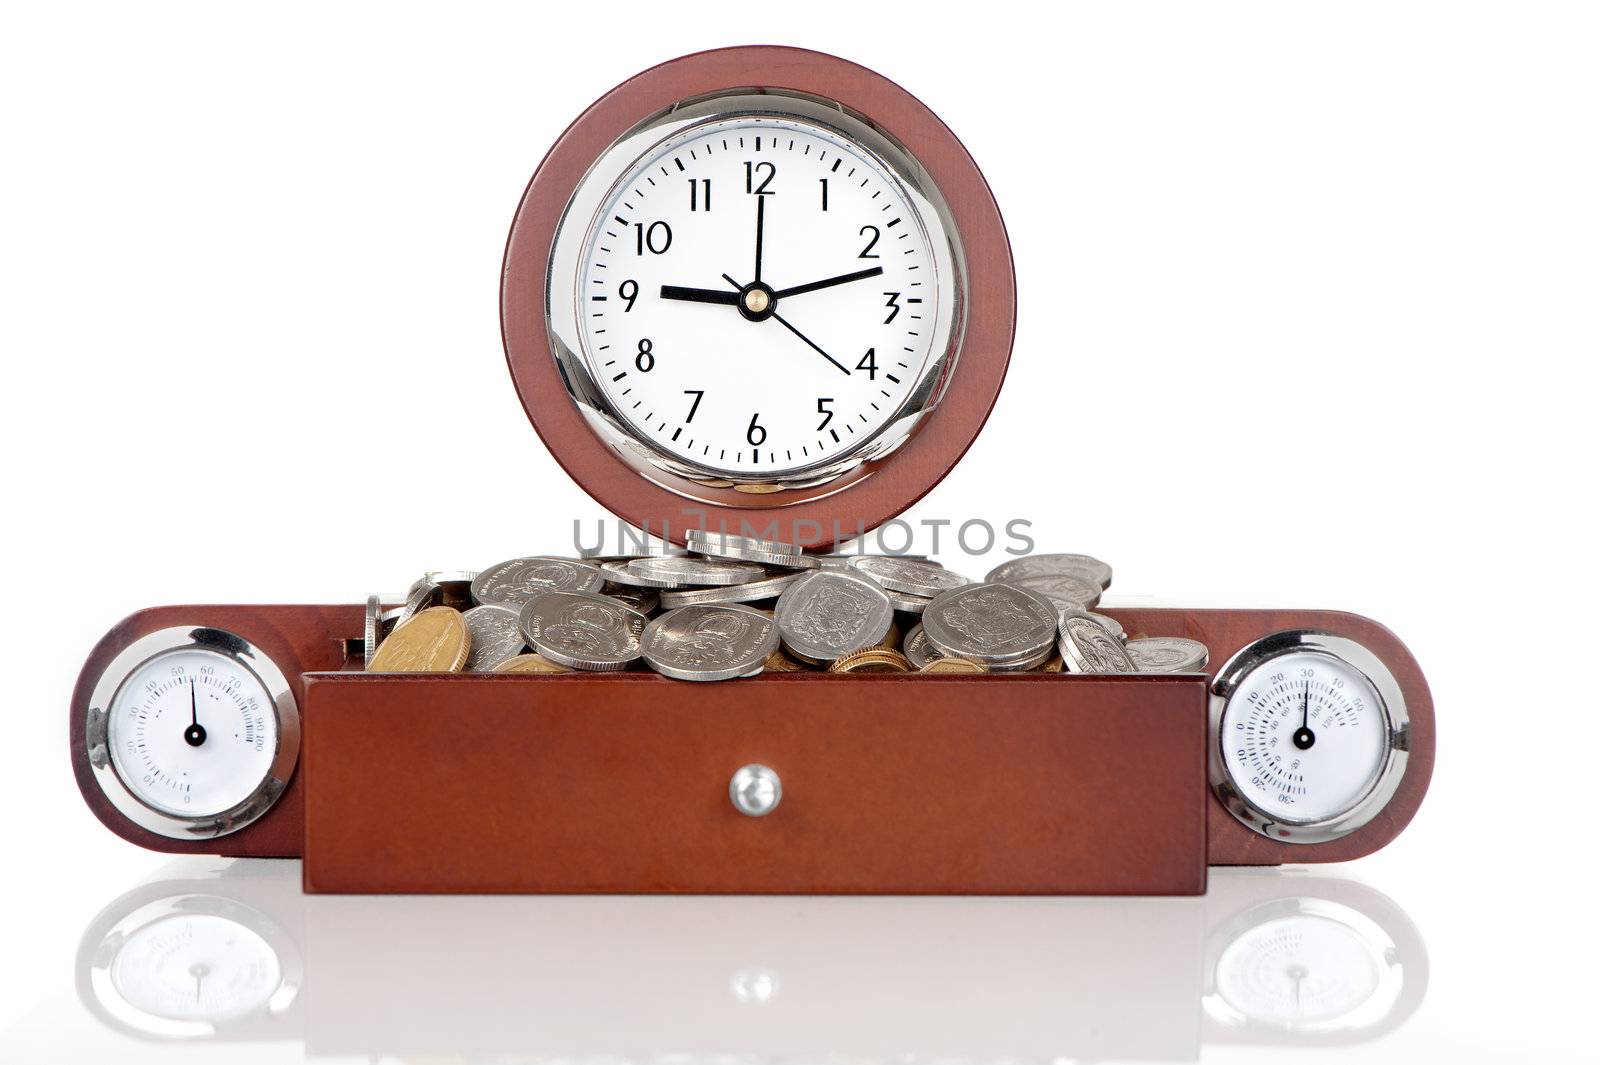 A clock with a wooden frame contains a drawer filled with coins.